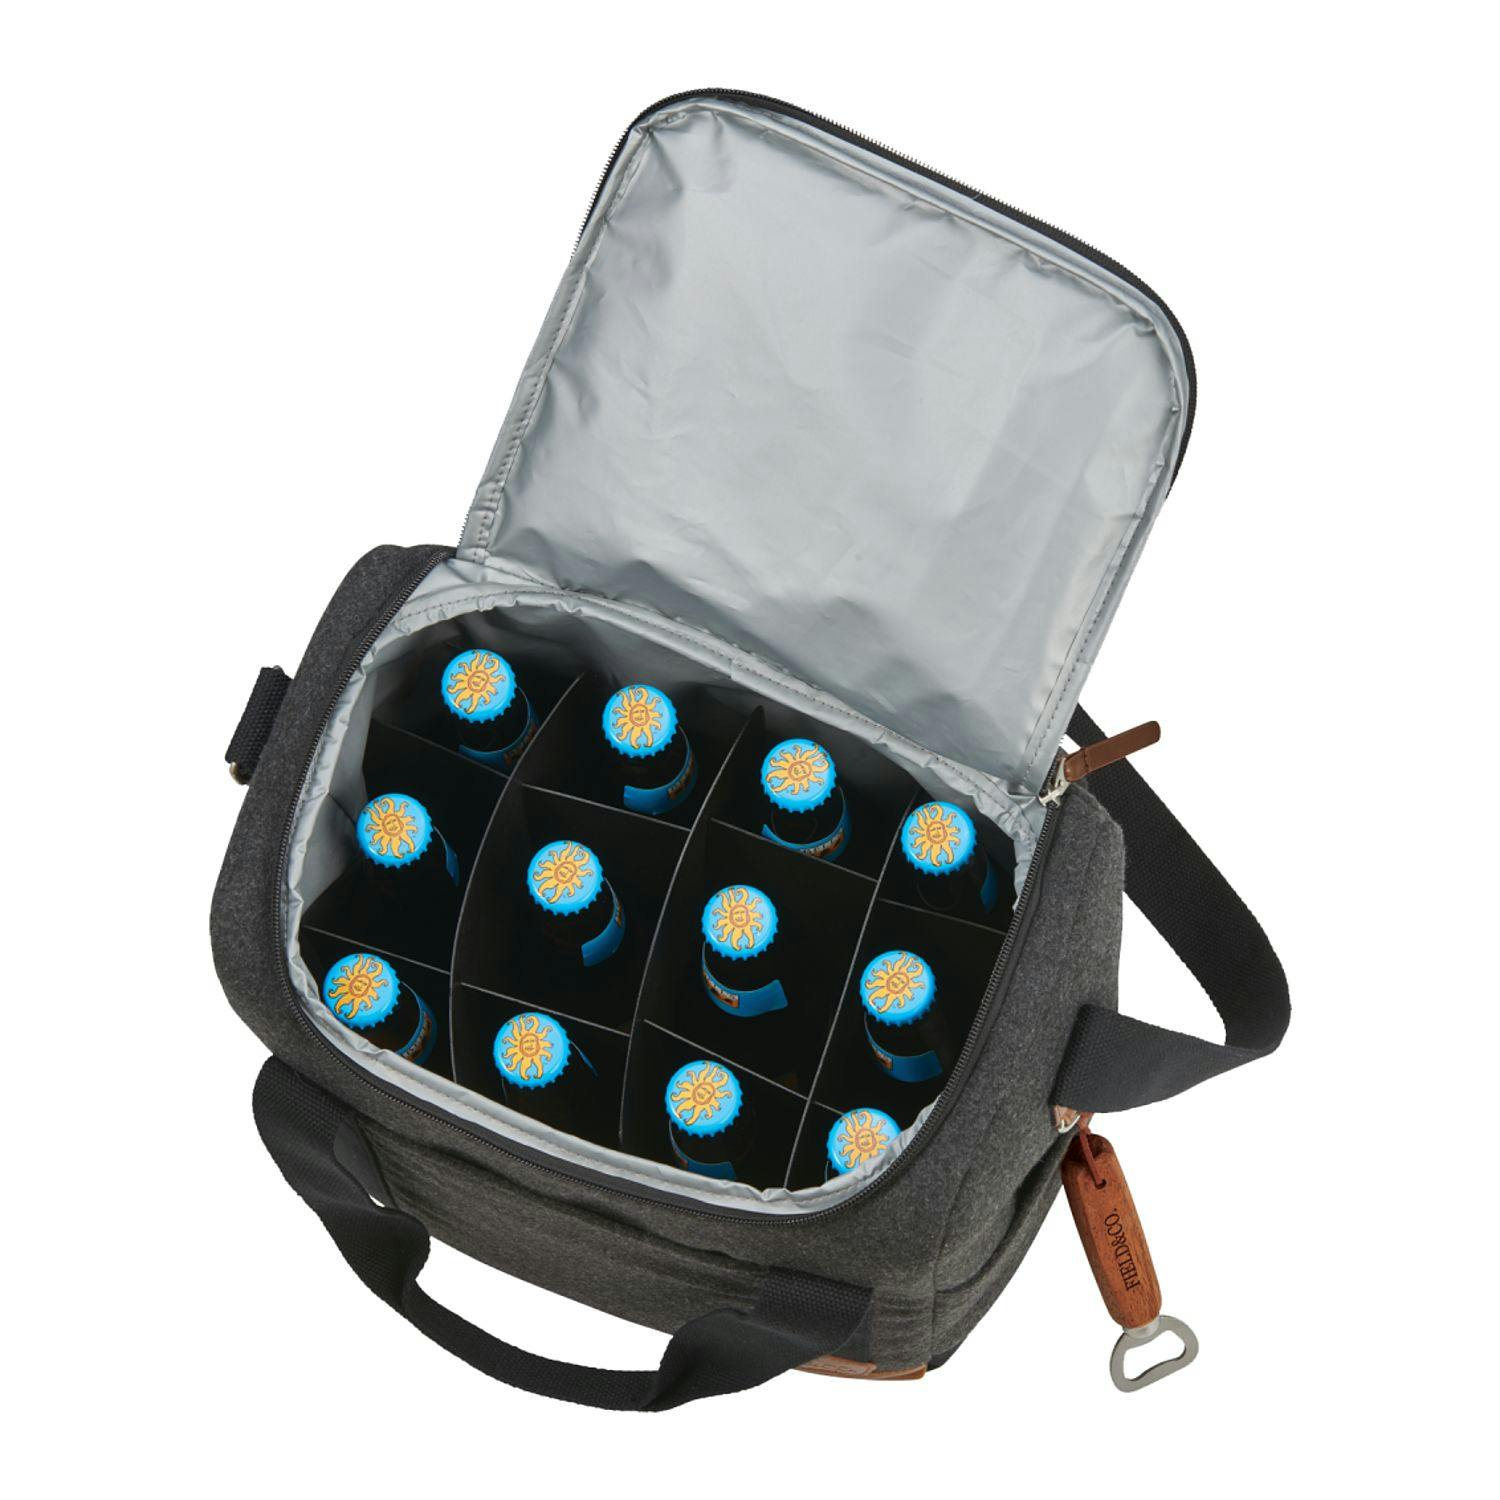 Field & Co.® Campster 12 Bottle Craft Cooler - additional Image 1